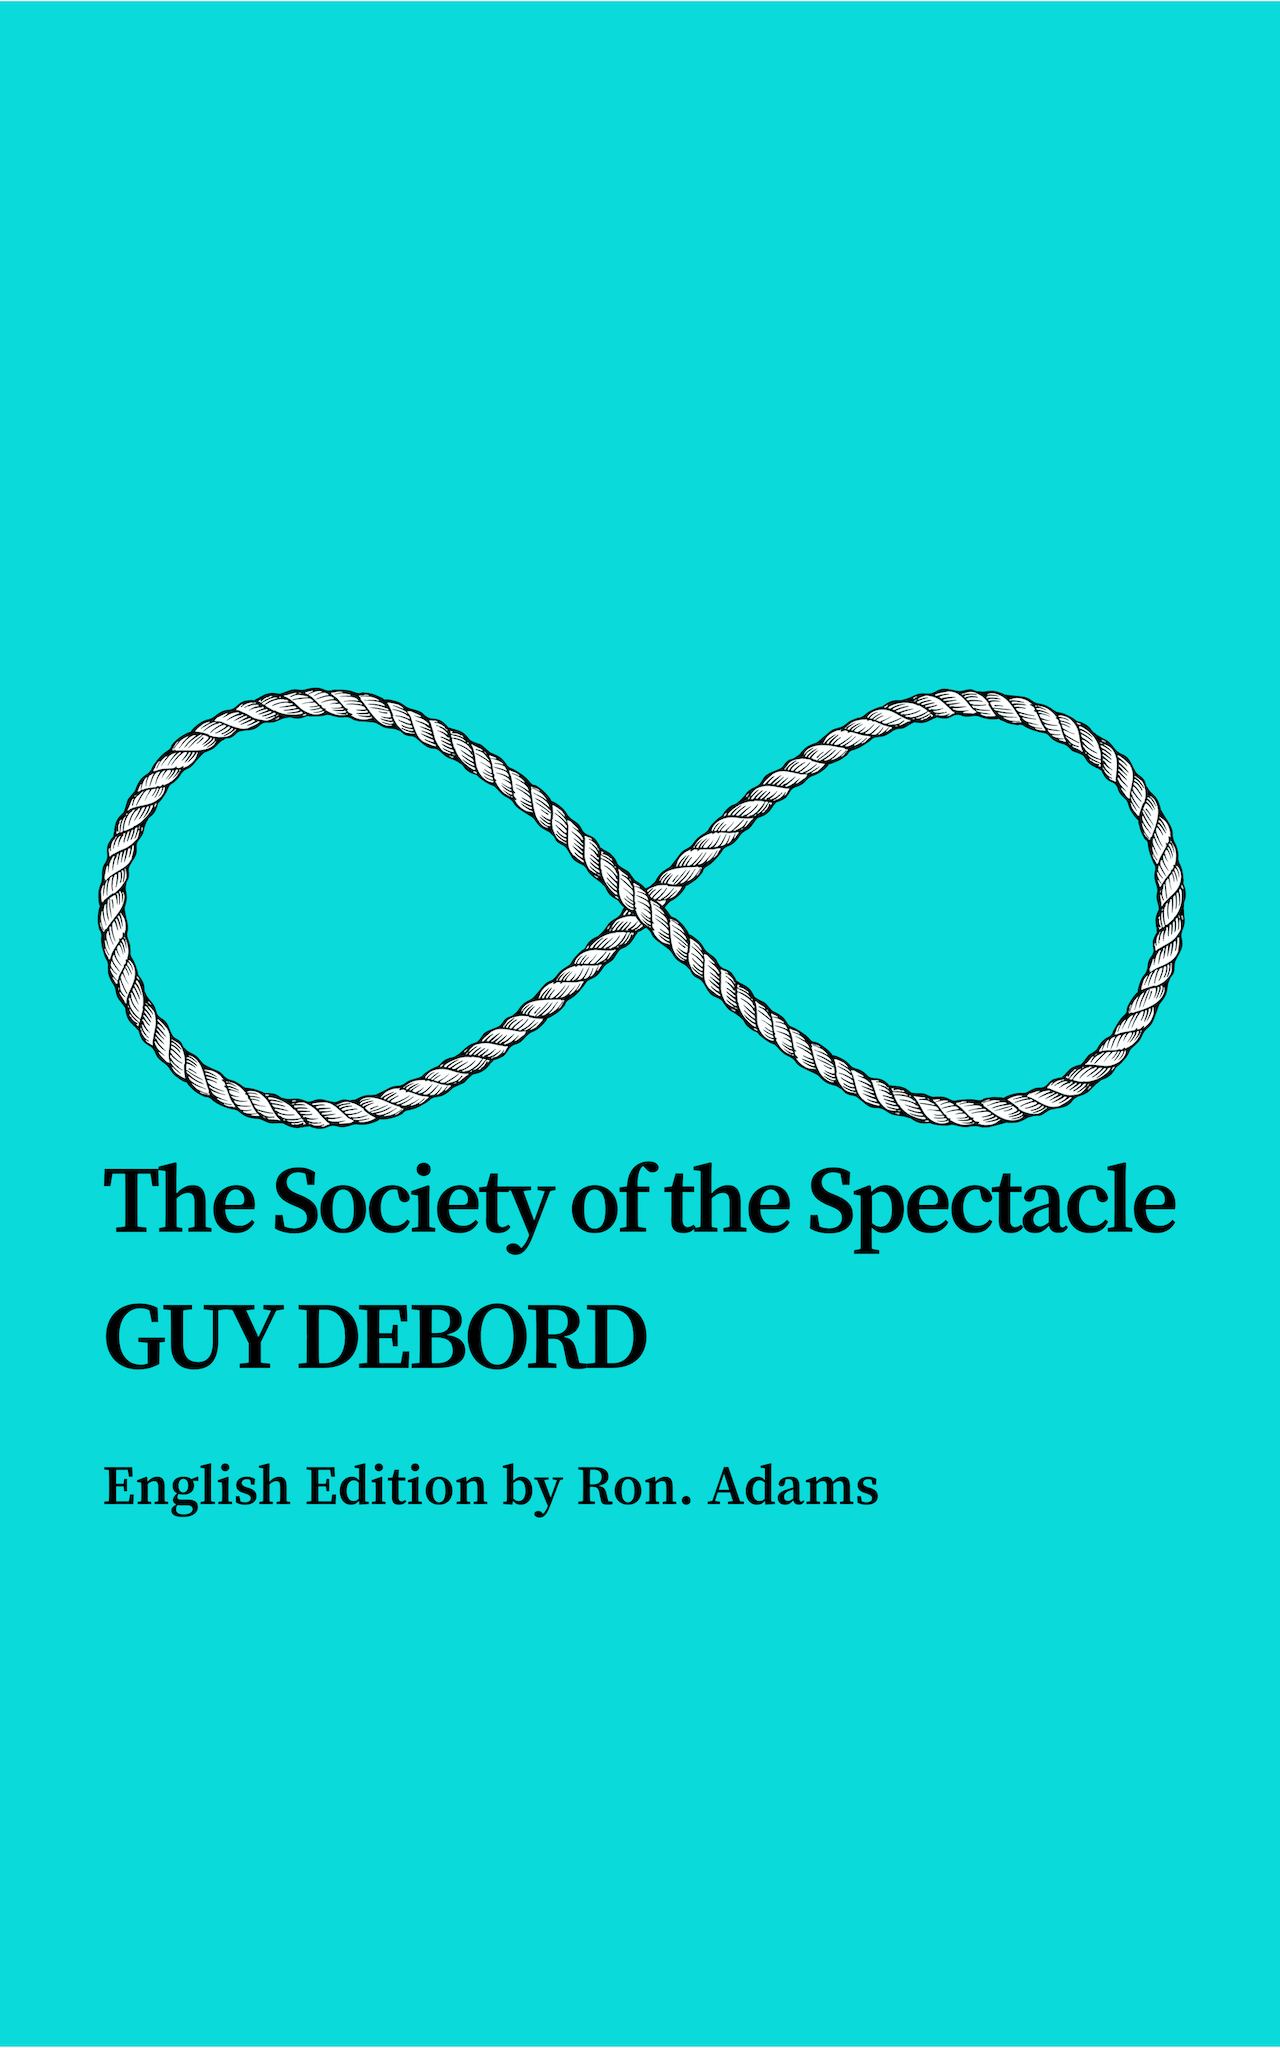 The Society of the Spectacle by Guy Debord